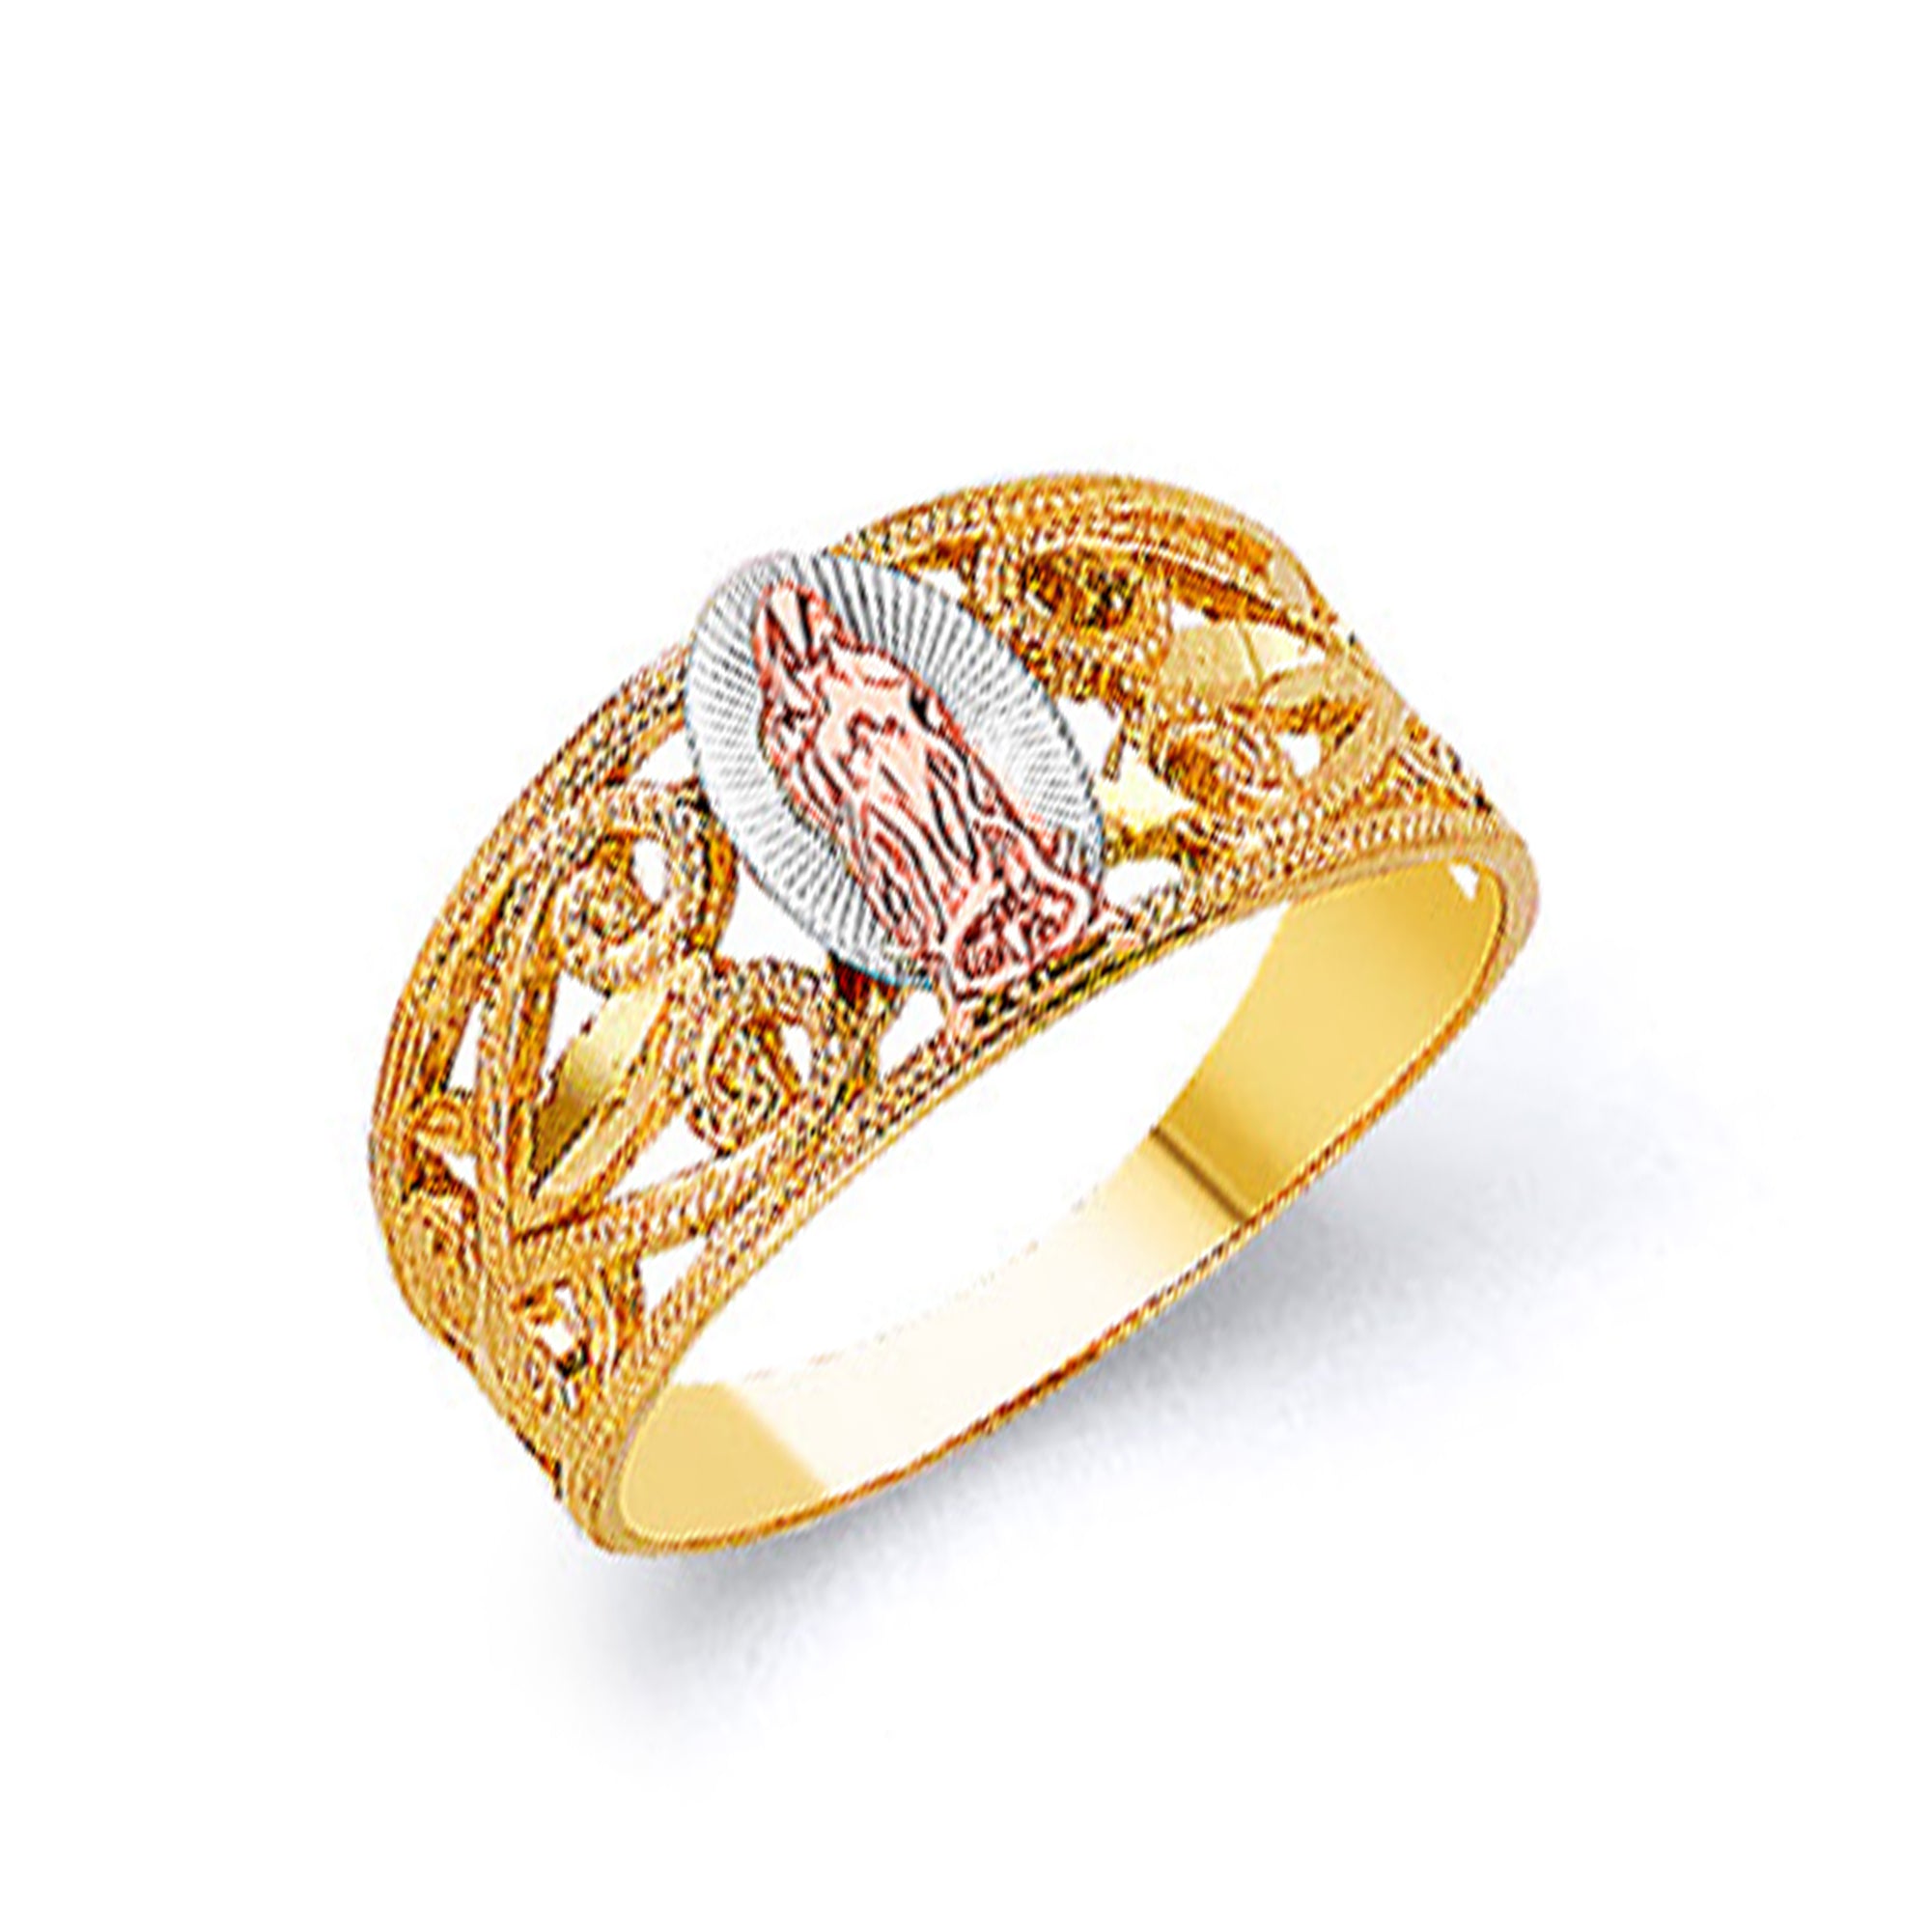 Textured Filigree Religious Ring in Solid Gold 